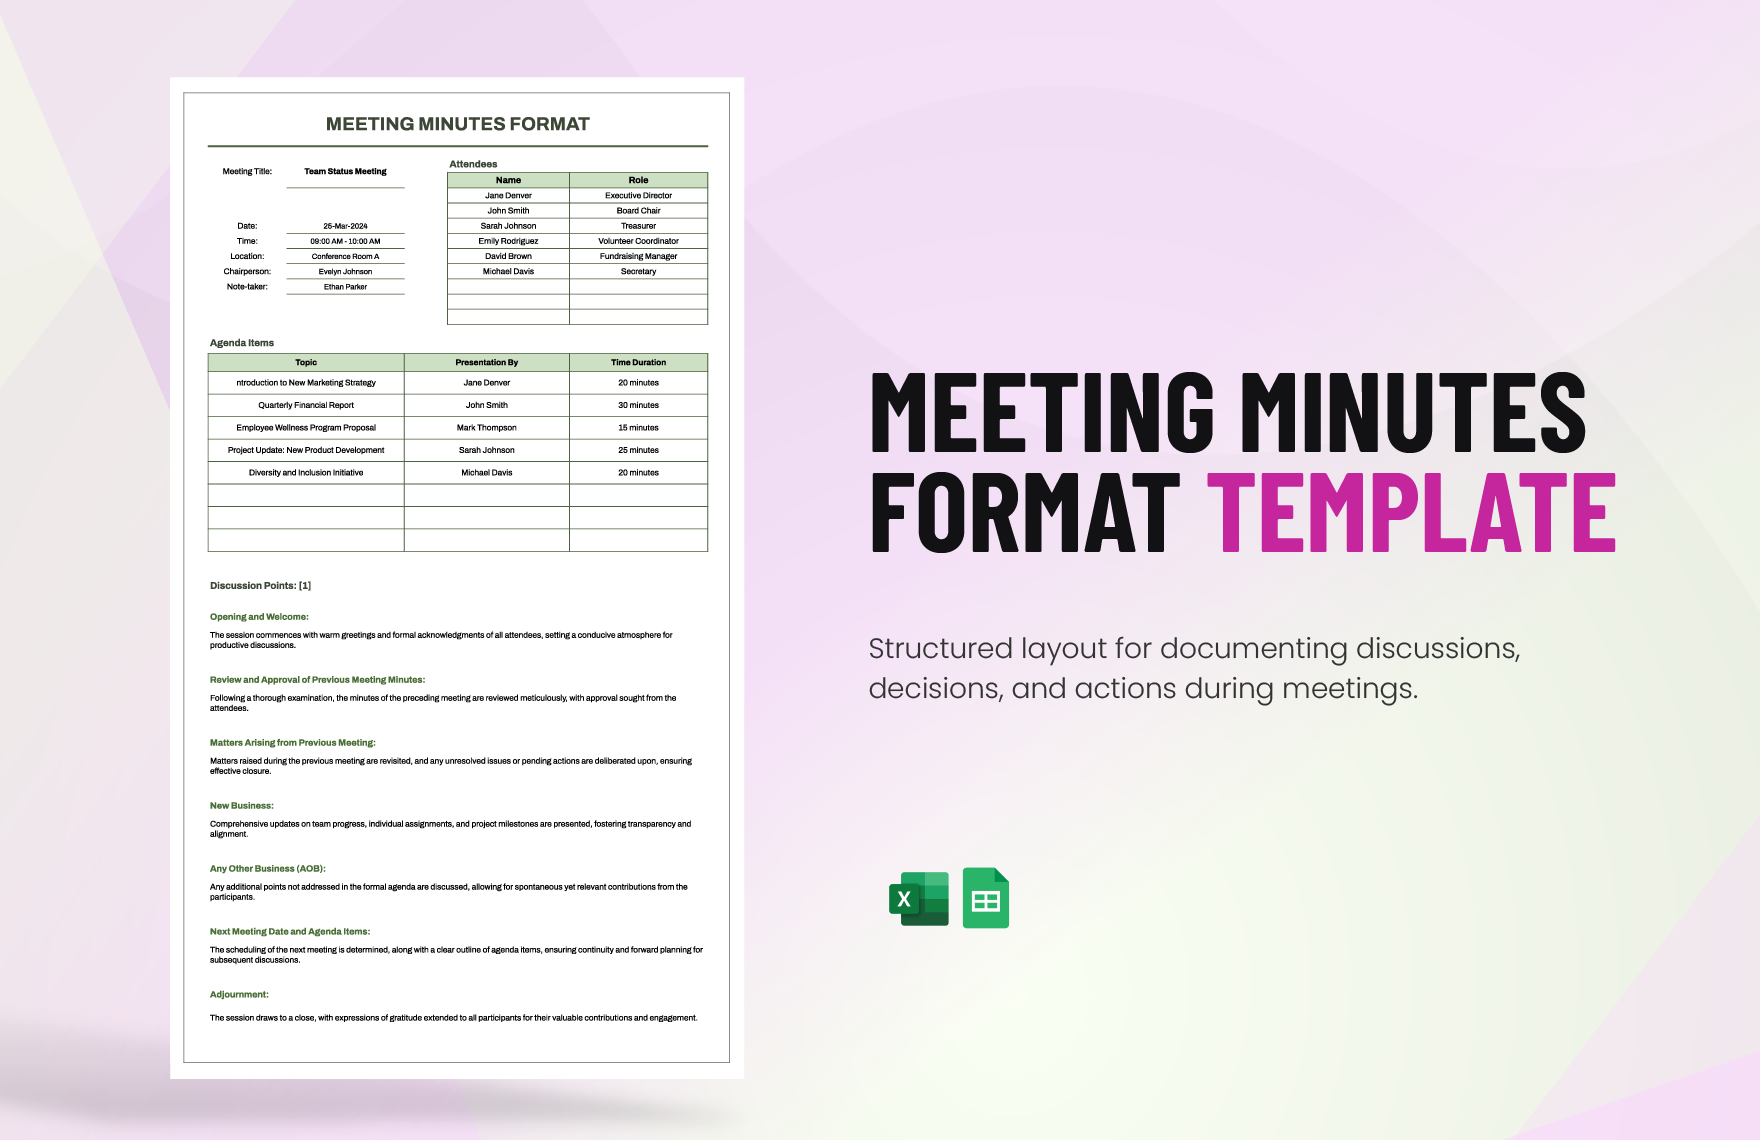 Meeting Minutes Format Template in Excel, Google Sheets